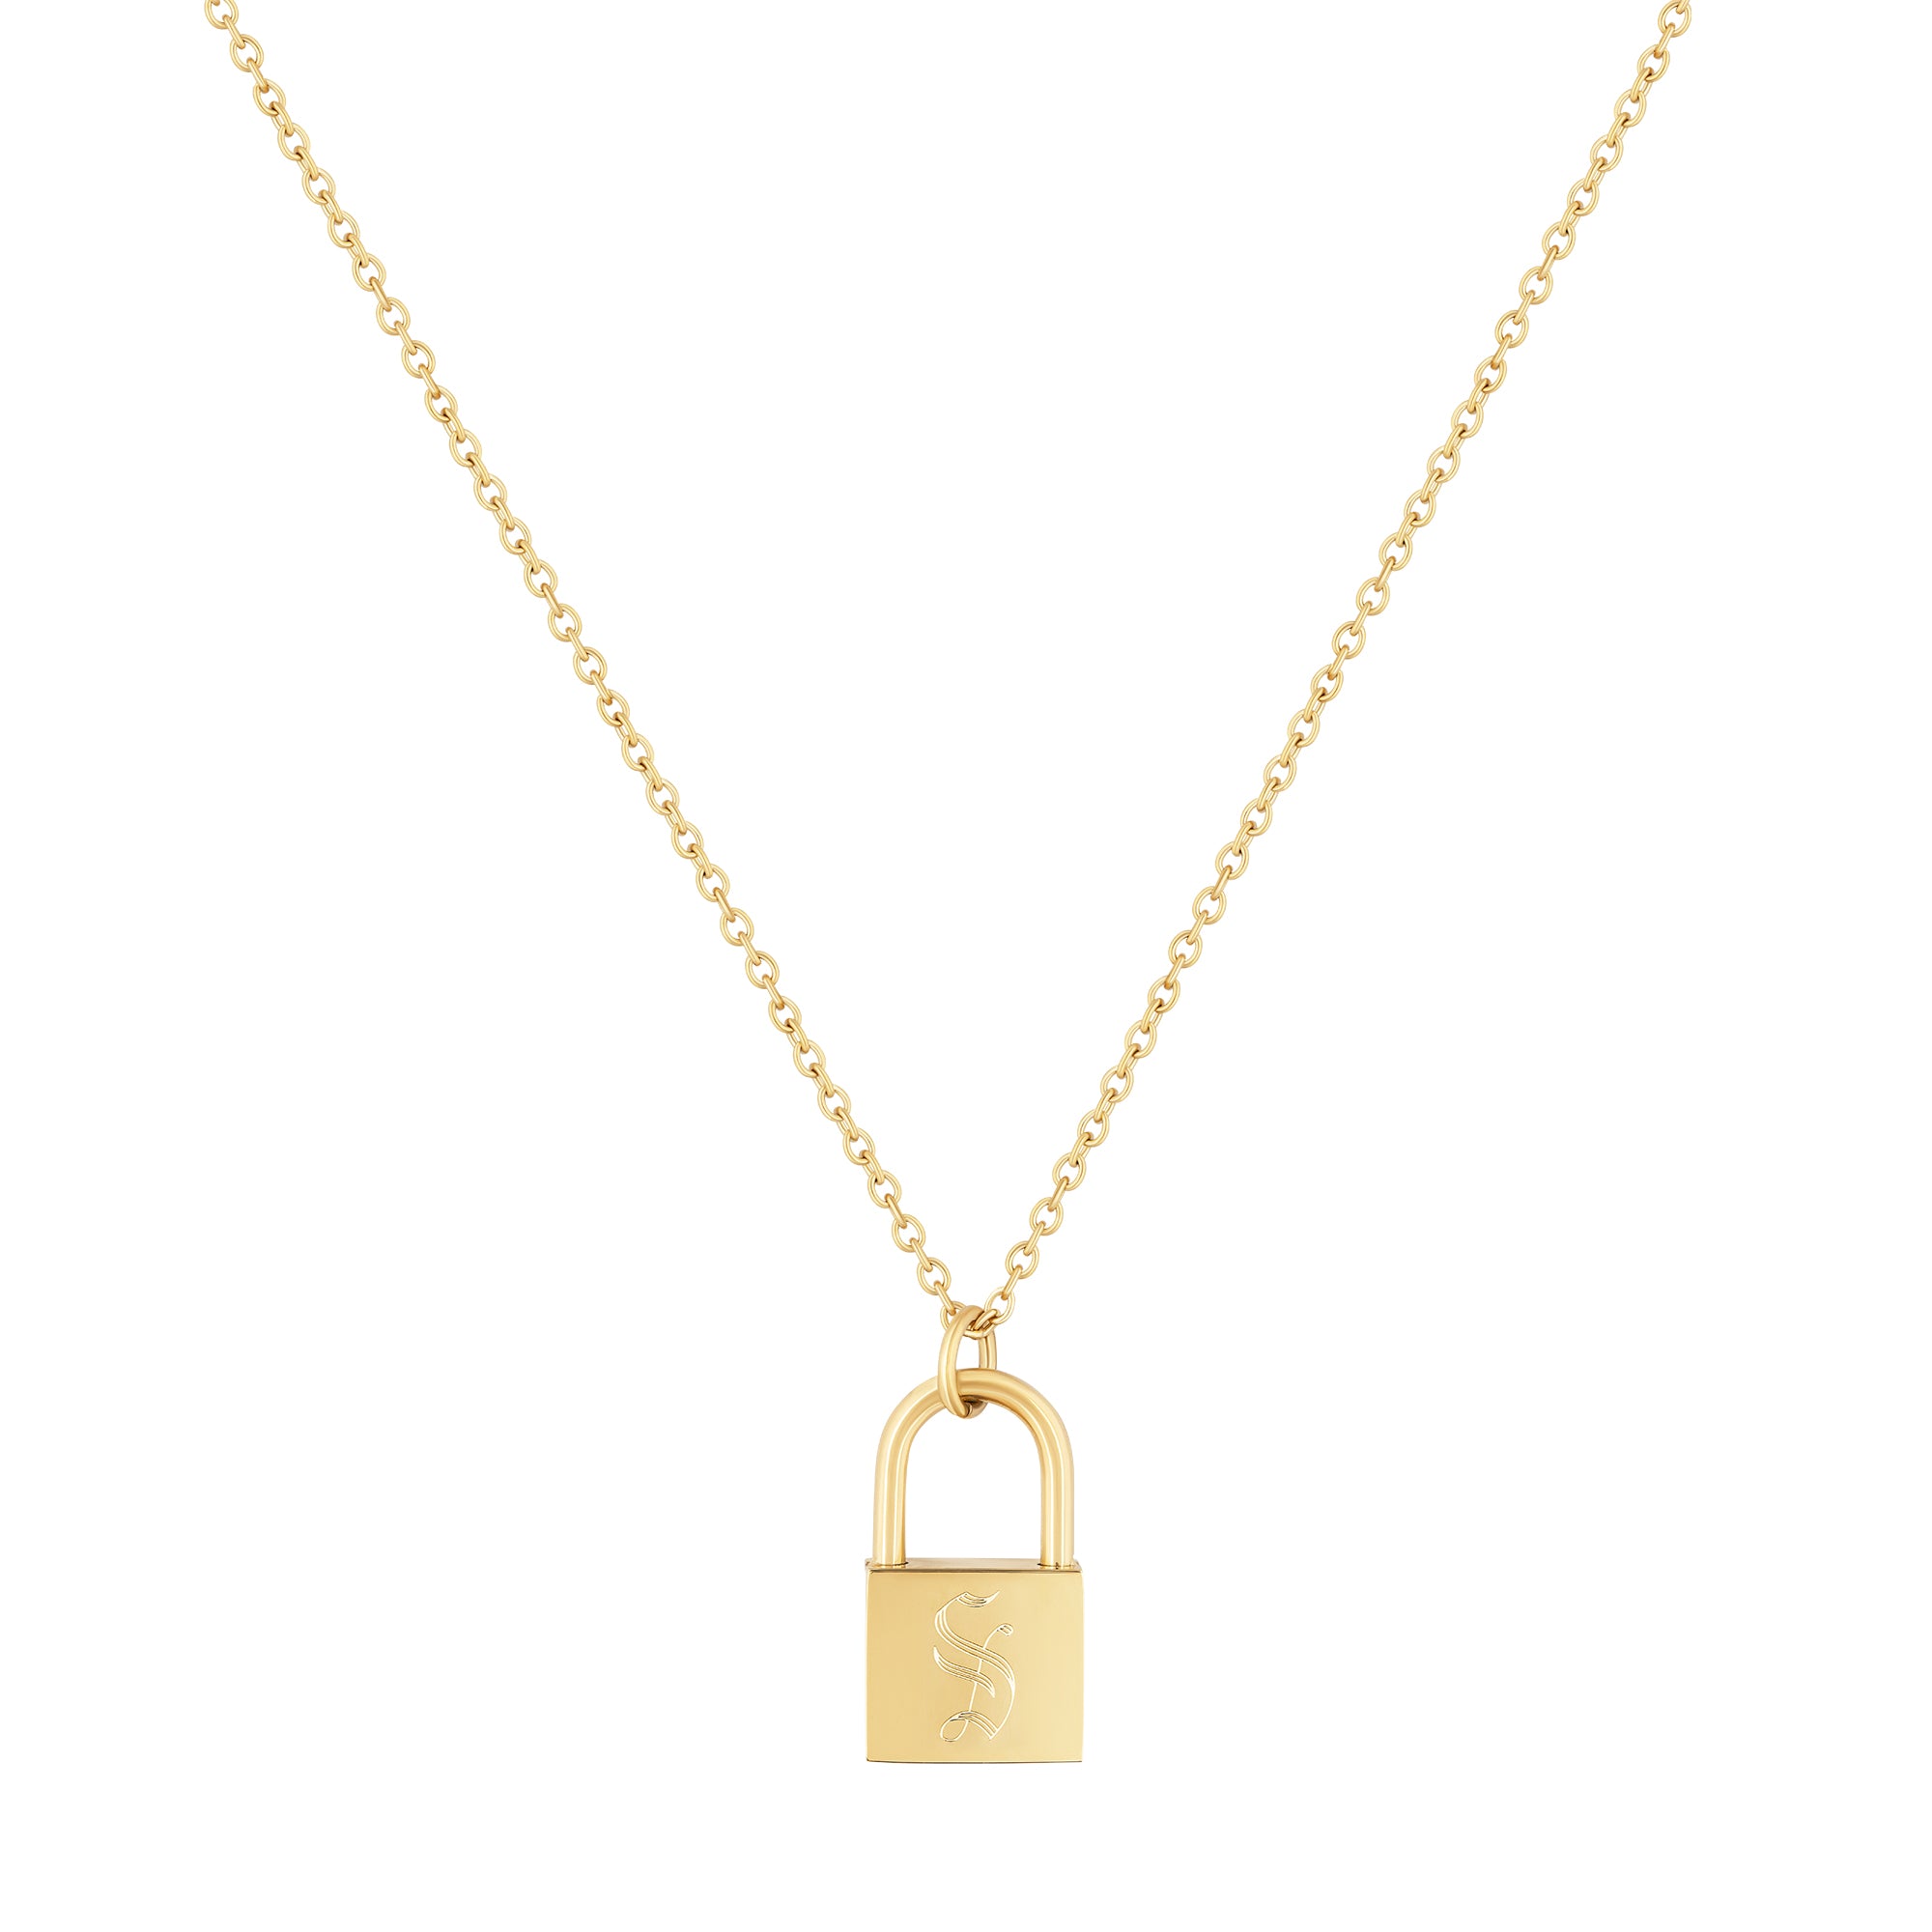 Personalised Love Locked Gold Plated Padlock and Key Necklace